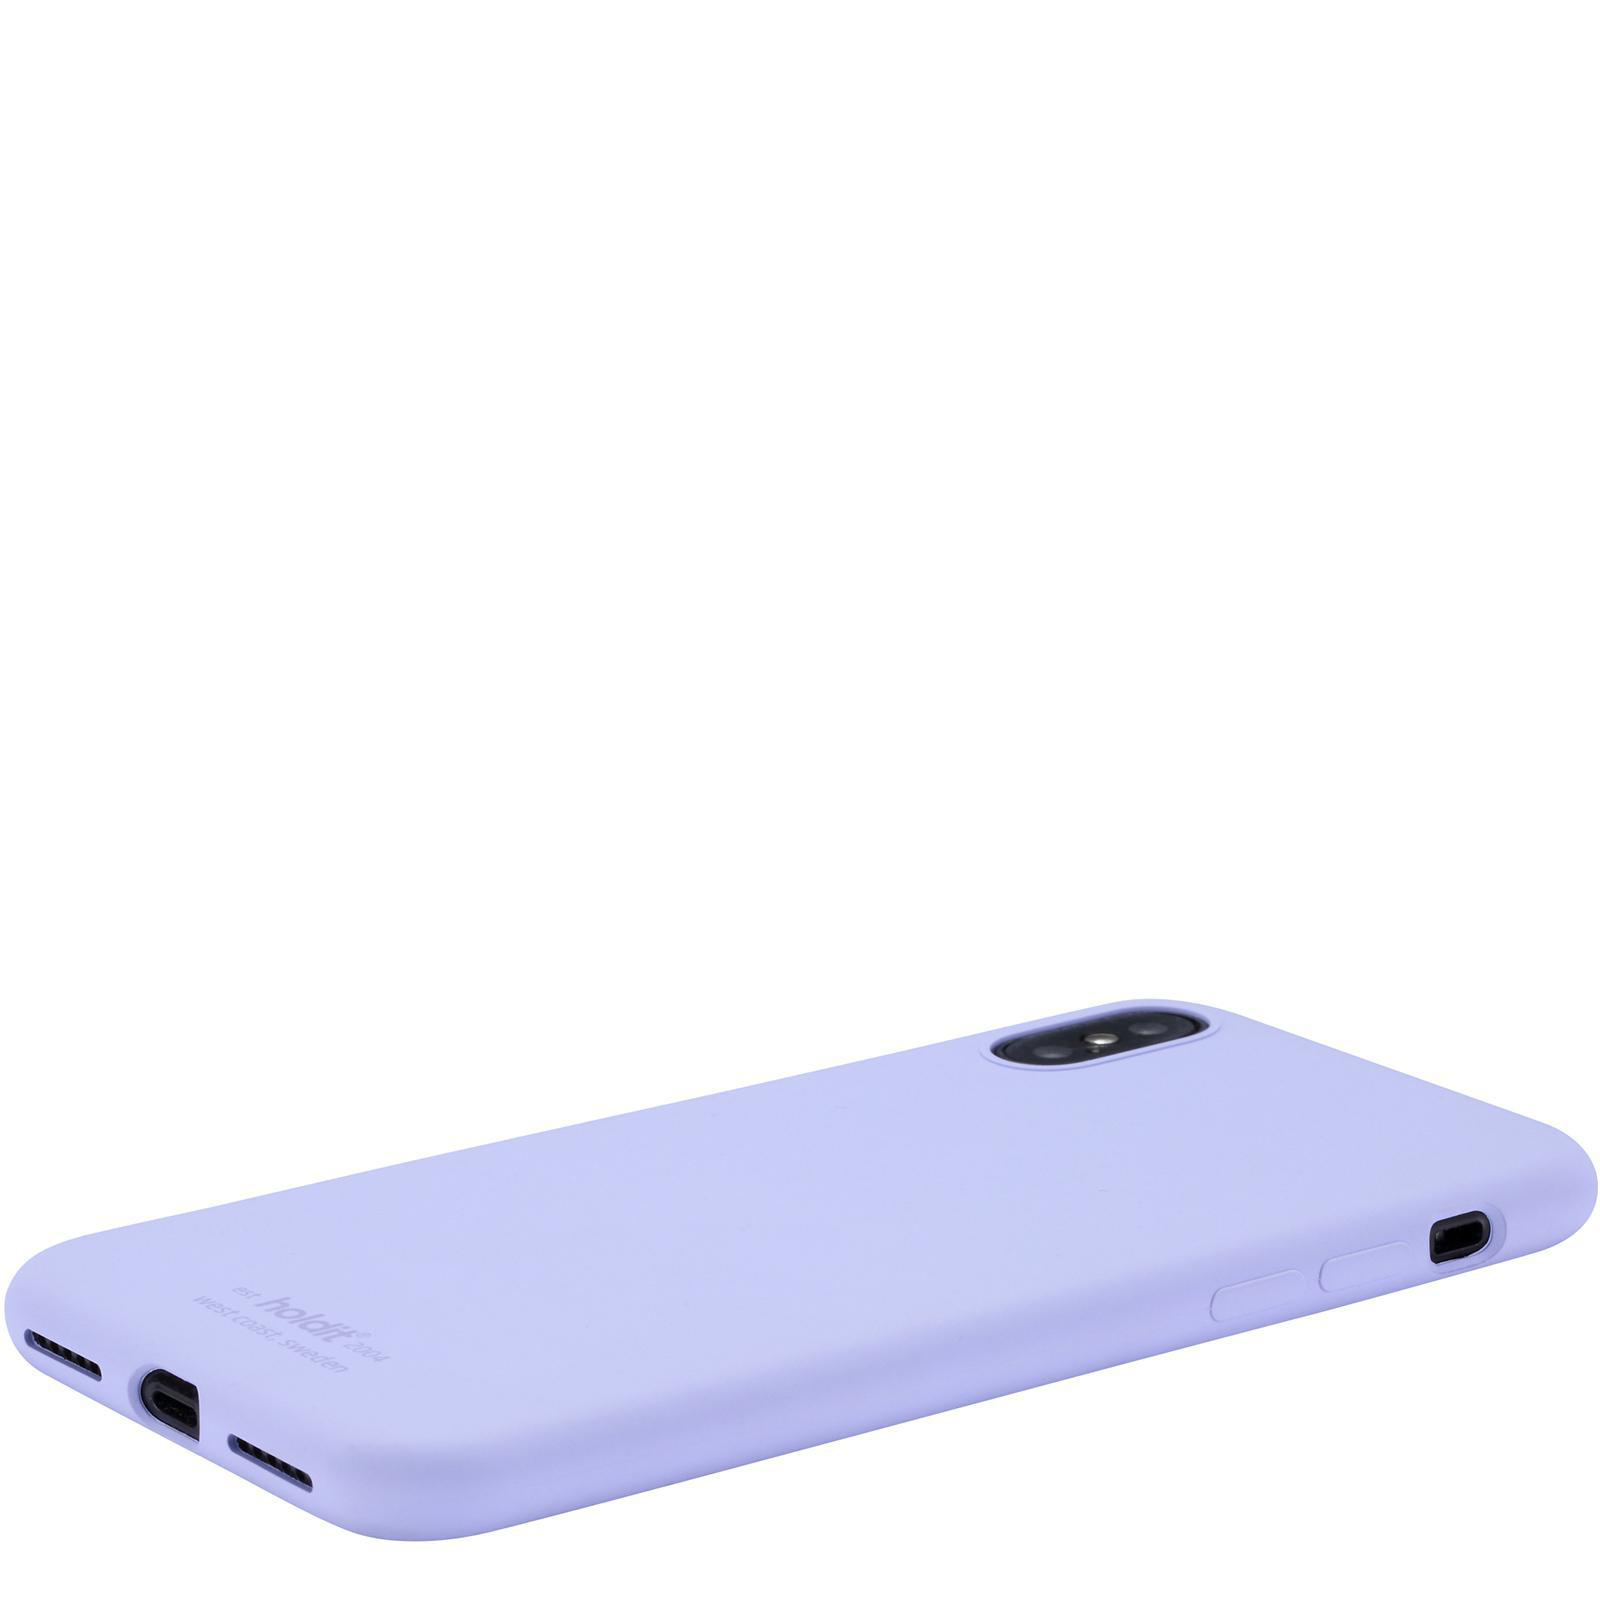 HOLDIT Silicone, X, iPhone XS Apple, Backcover, Lavendel 